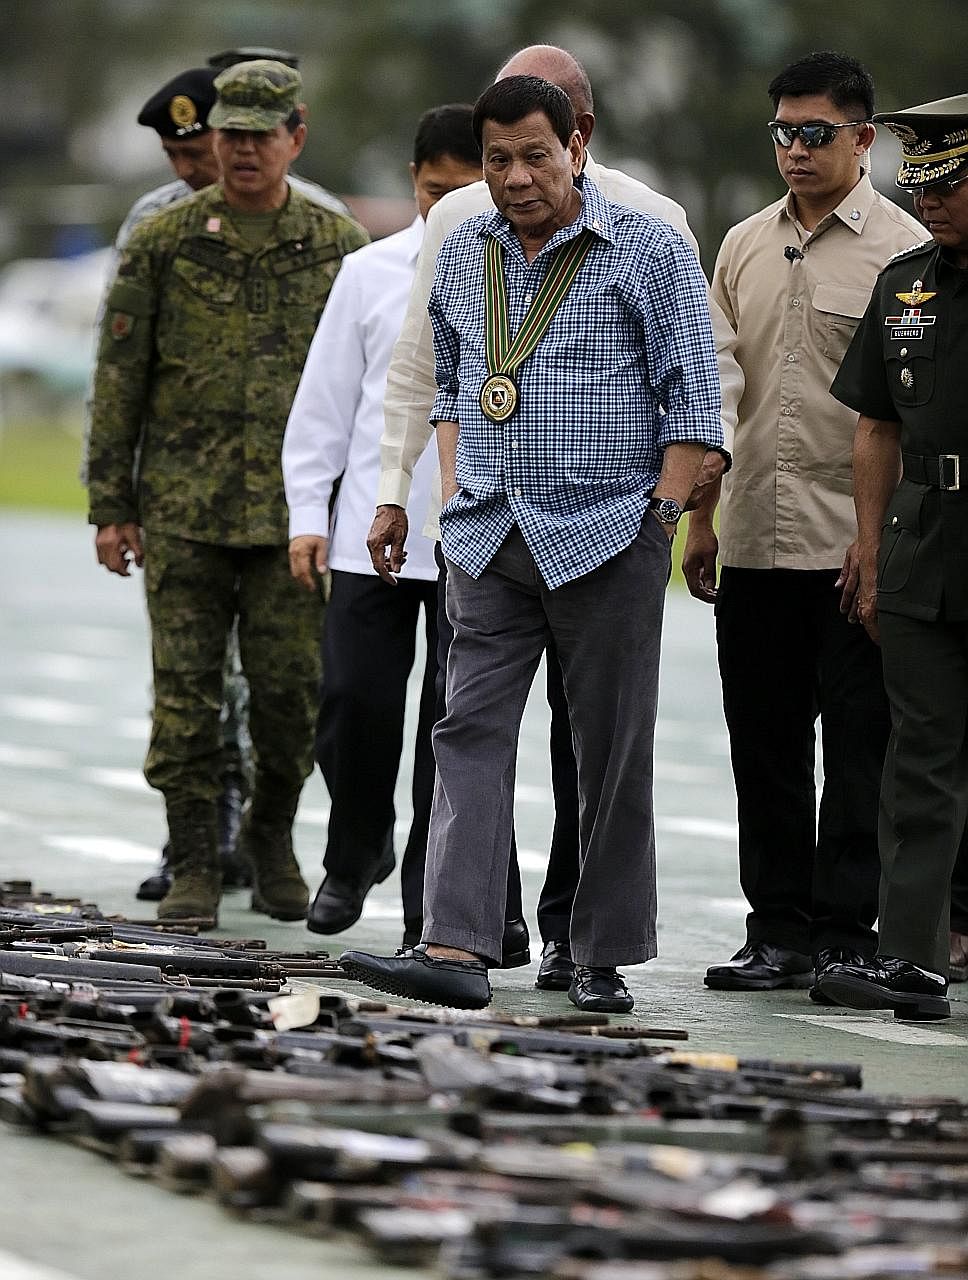 Philippine President Rodrigo Duterte looking at arms confiscated from extremists who had seized large parts of Marawi.